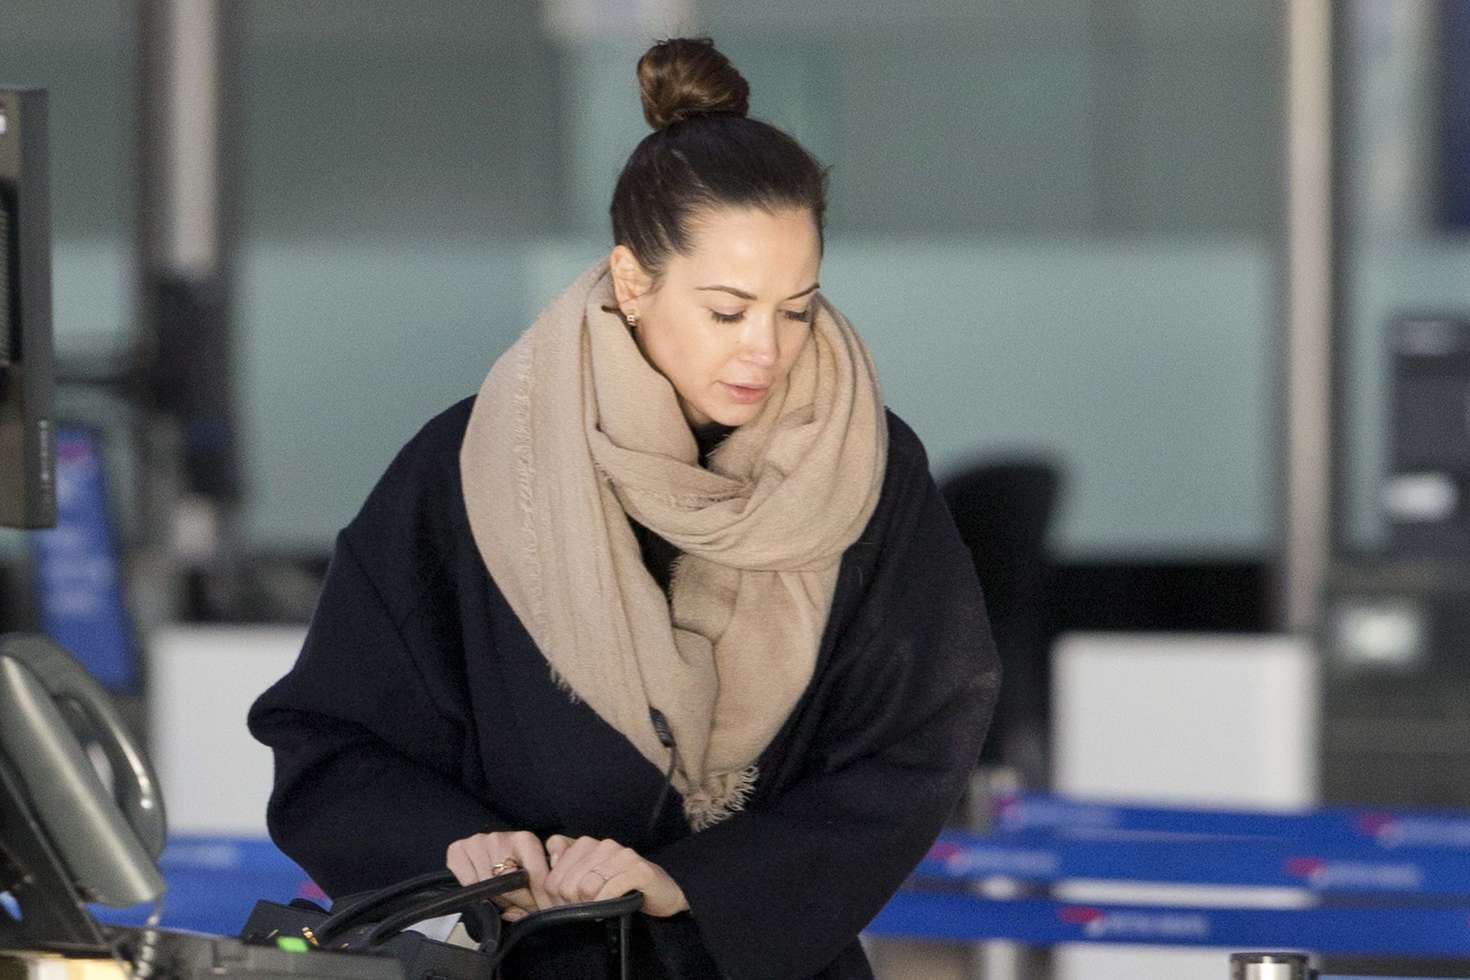 Mandy Capristo at Heathrow Airport in London-1